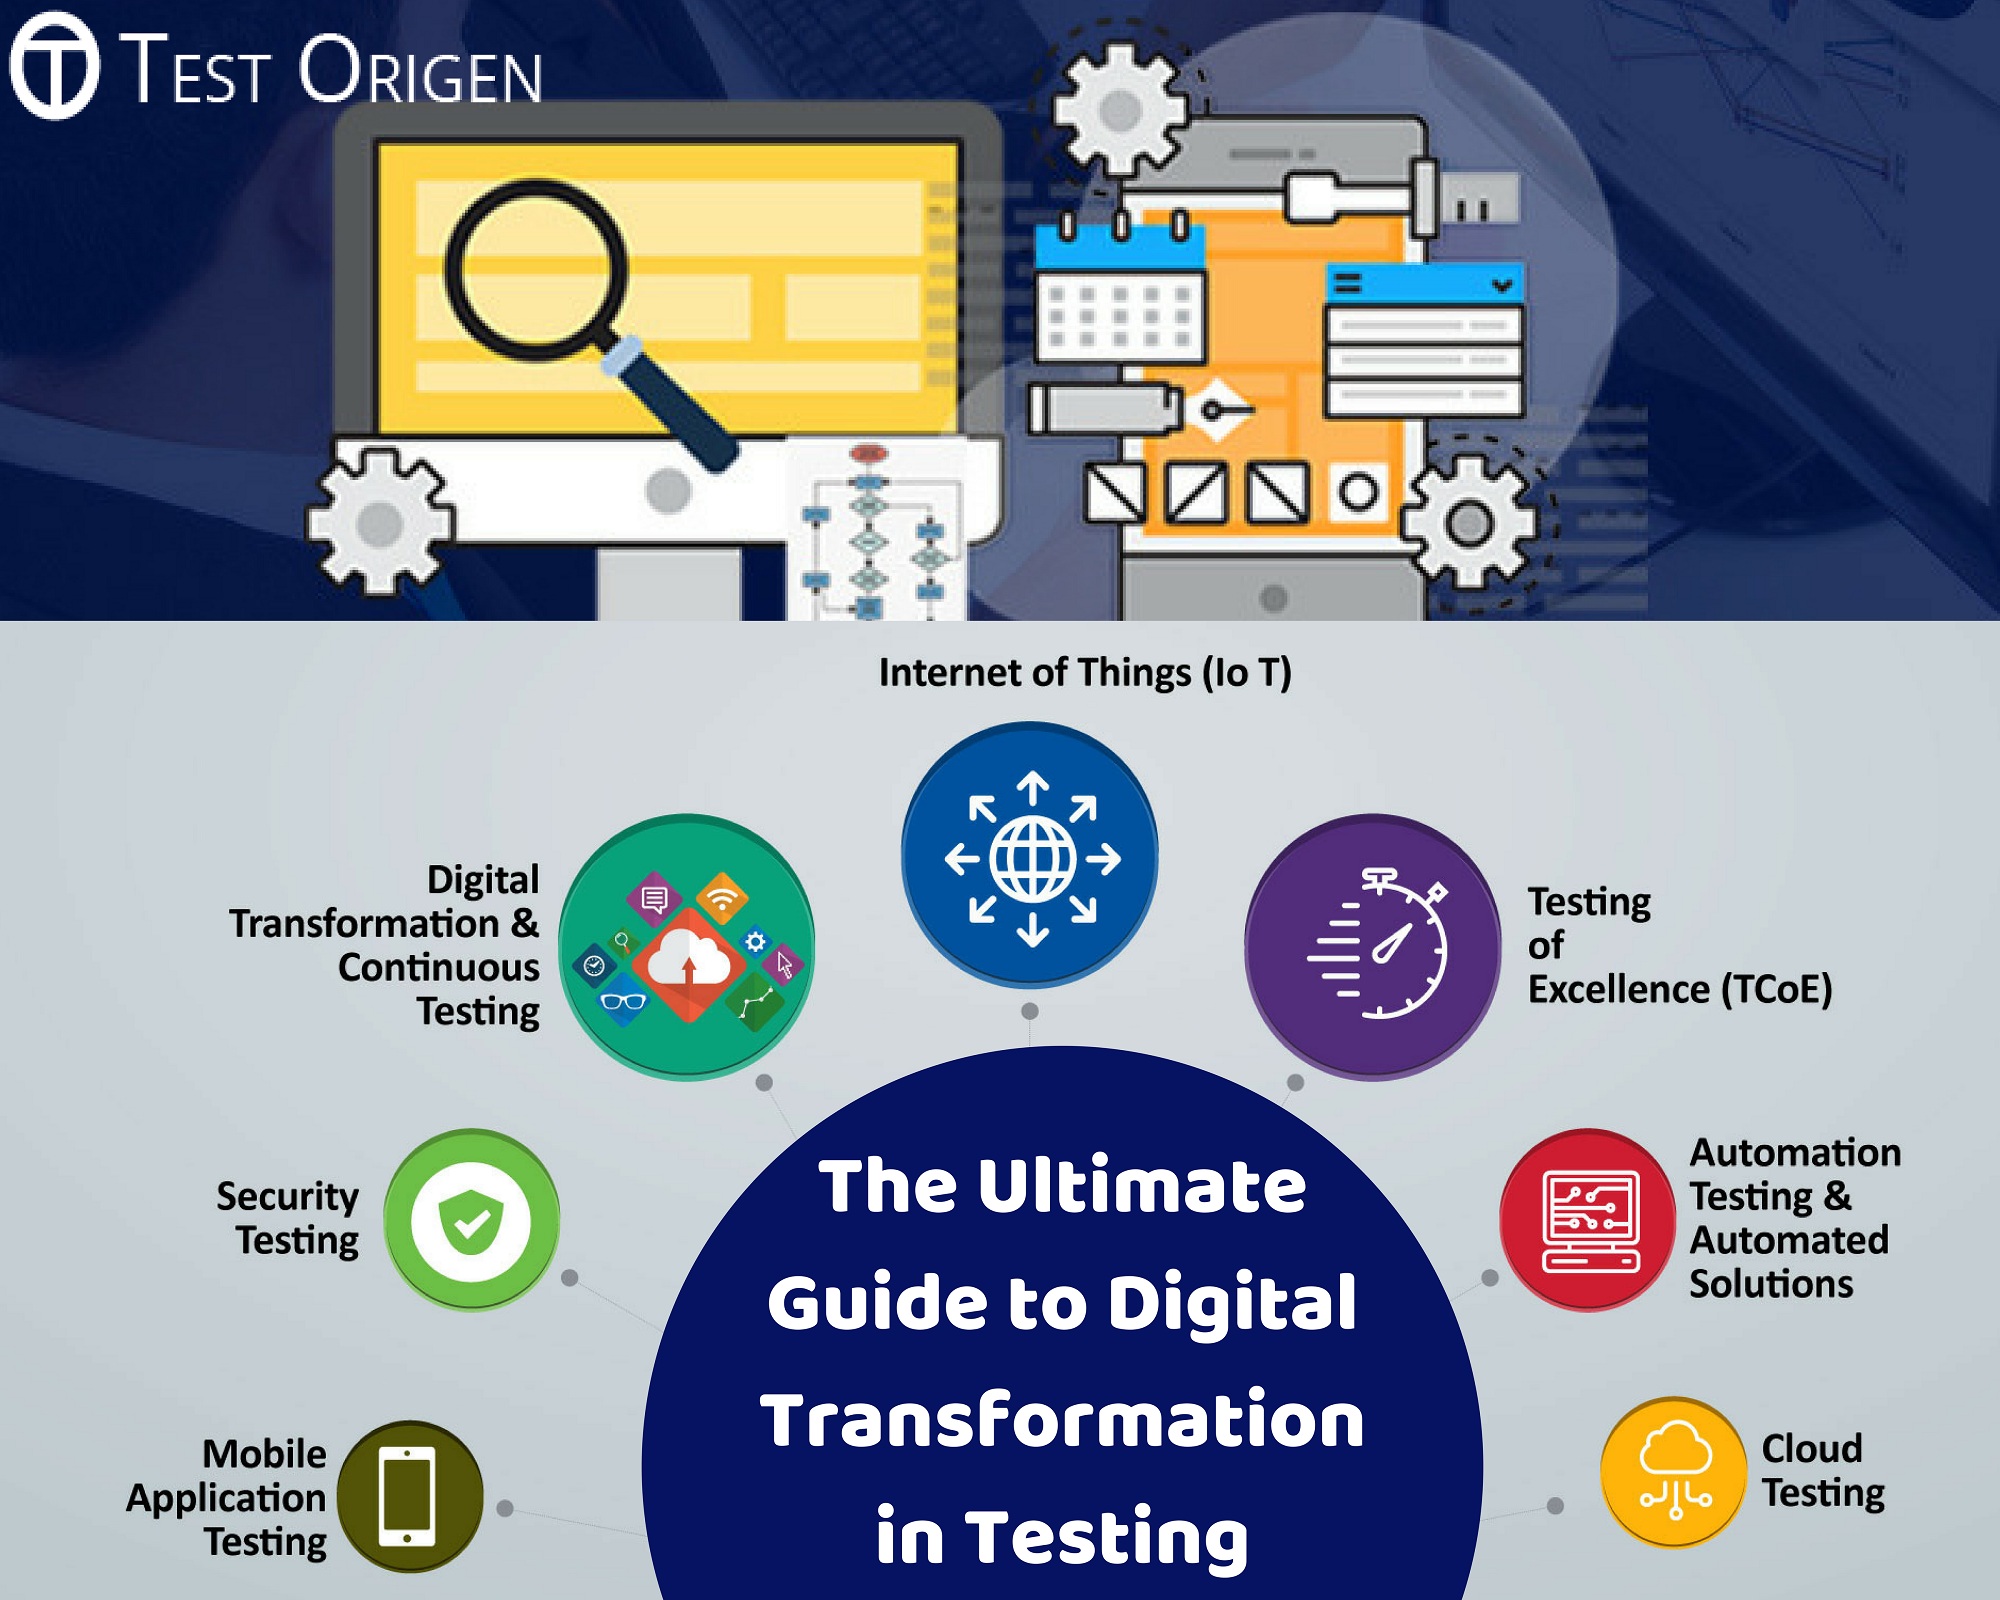 The Ultimate Guide to Digital Transformation in Testing